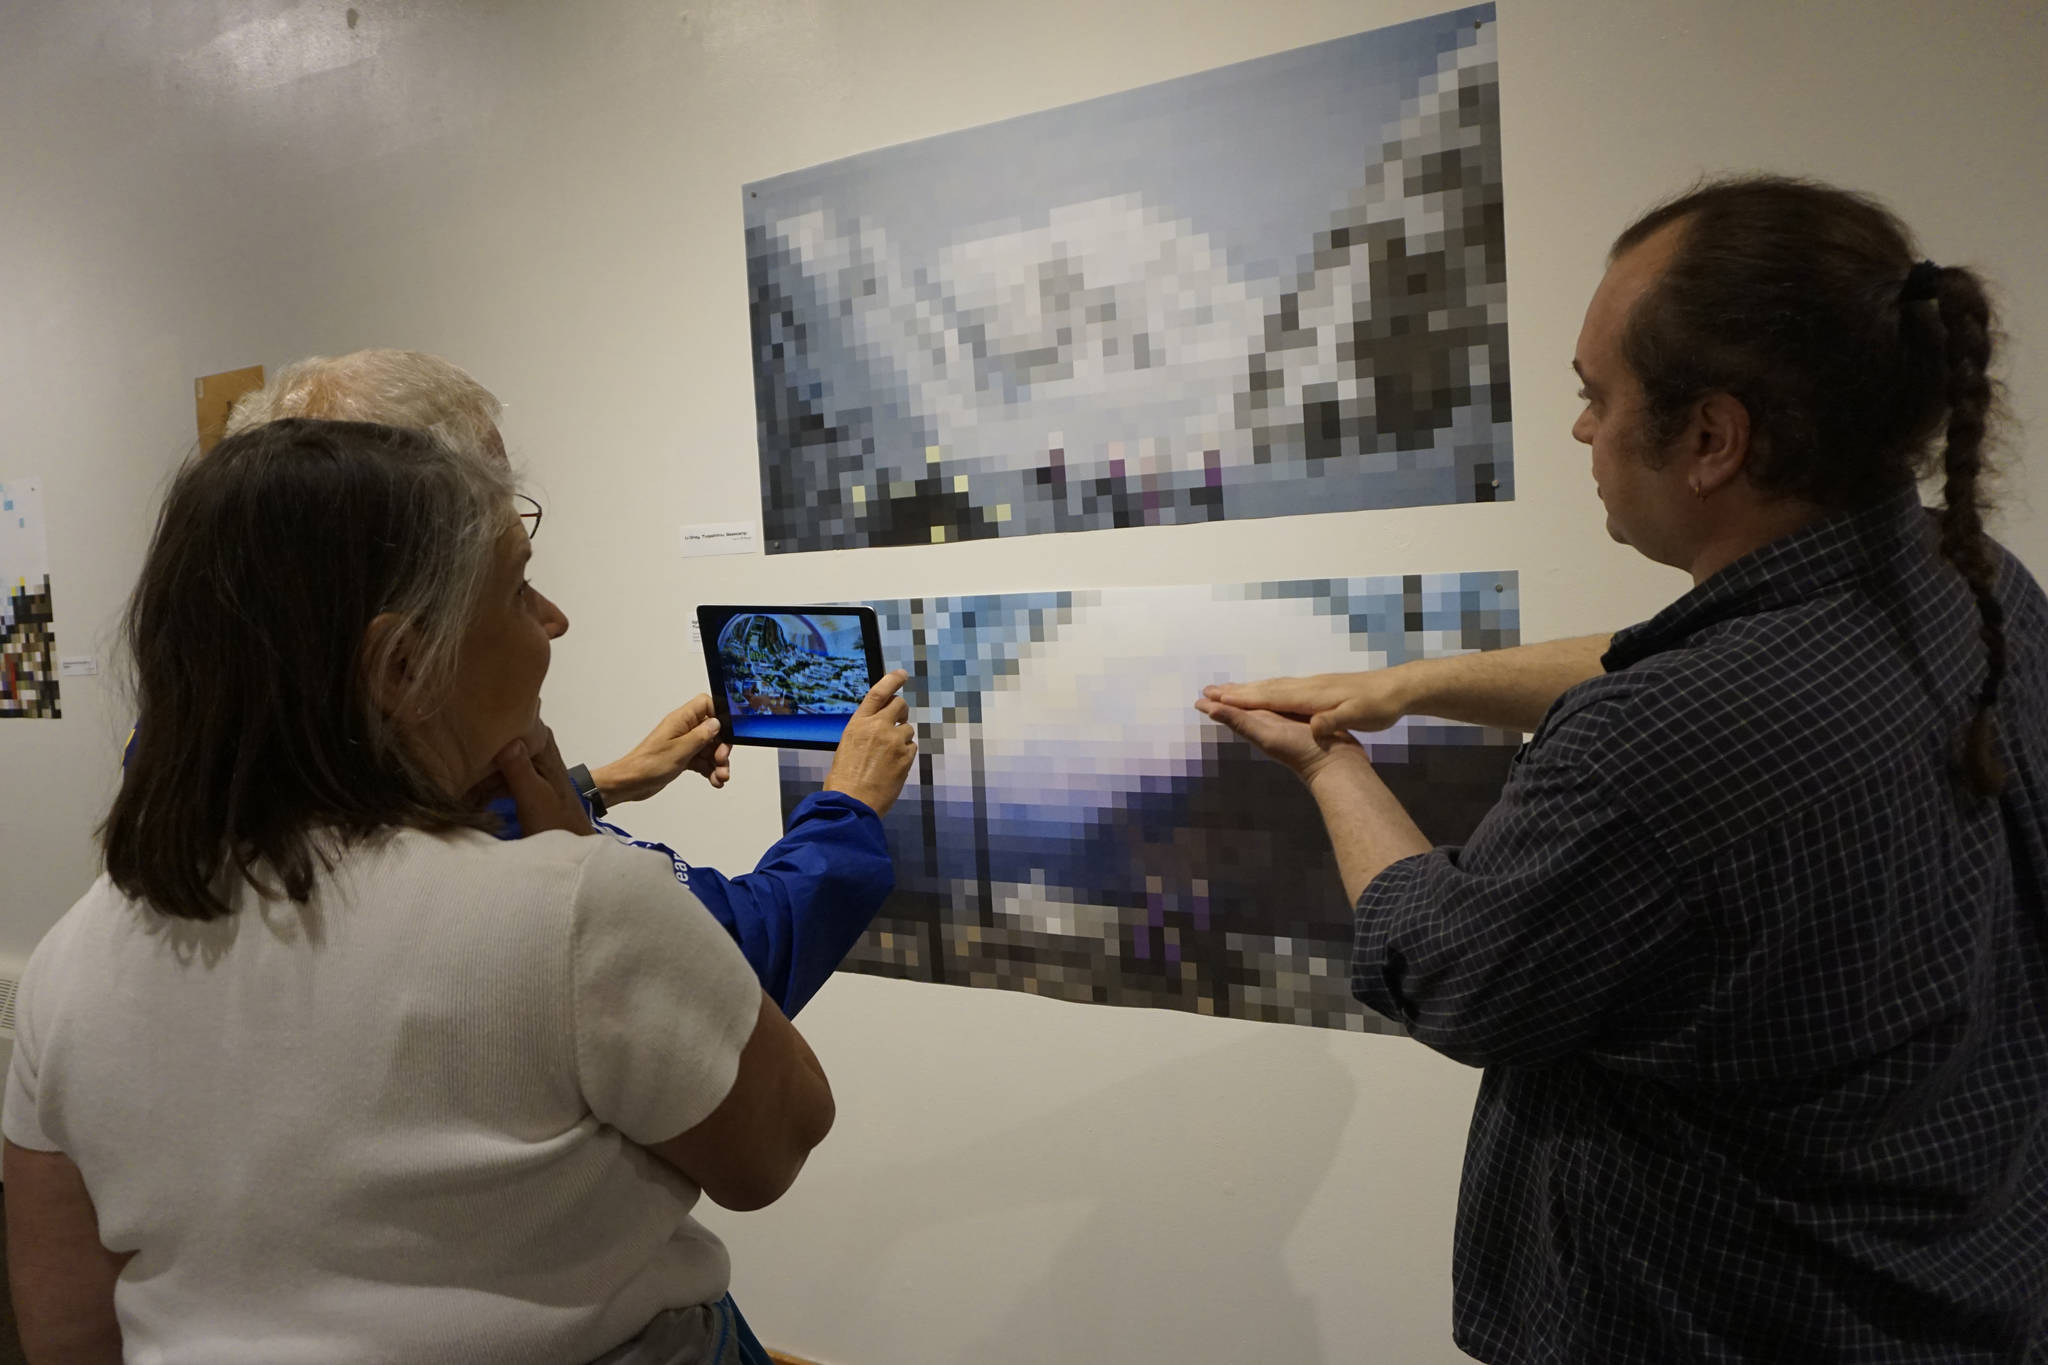 James Dolma views an image in an iPad from the “Dirigibles of Denali” show at the Pratt Museum at the July 6, 2018 First Friday opening in Homer, Alaska. The images appear when viewed through the HP Reveal augmented reality app. Artist Nathan Shafer, far right, explains the process to Brenda Dolma, center. (Photo by Michael Armstrong/Homer News)